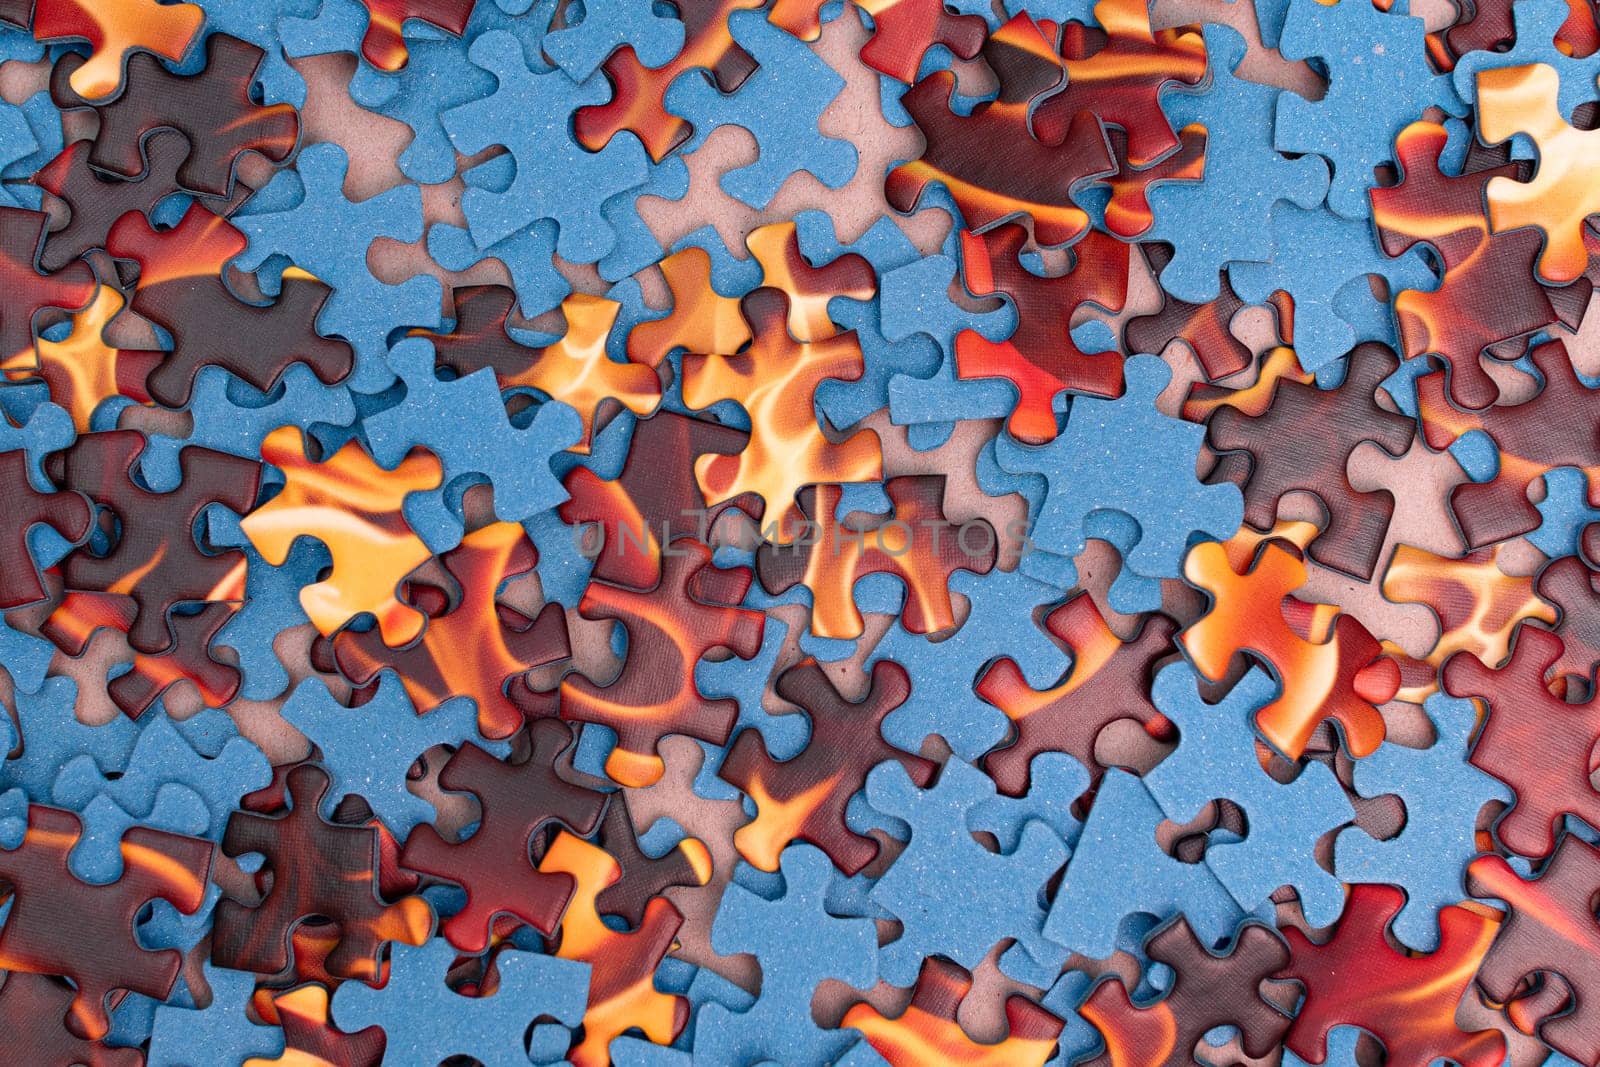 Top View of Mixed Pieces of a Jigsaw Puzzle - Texture Background